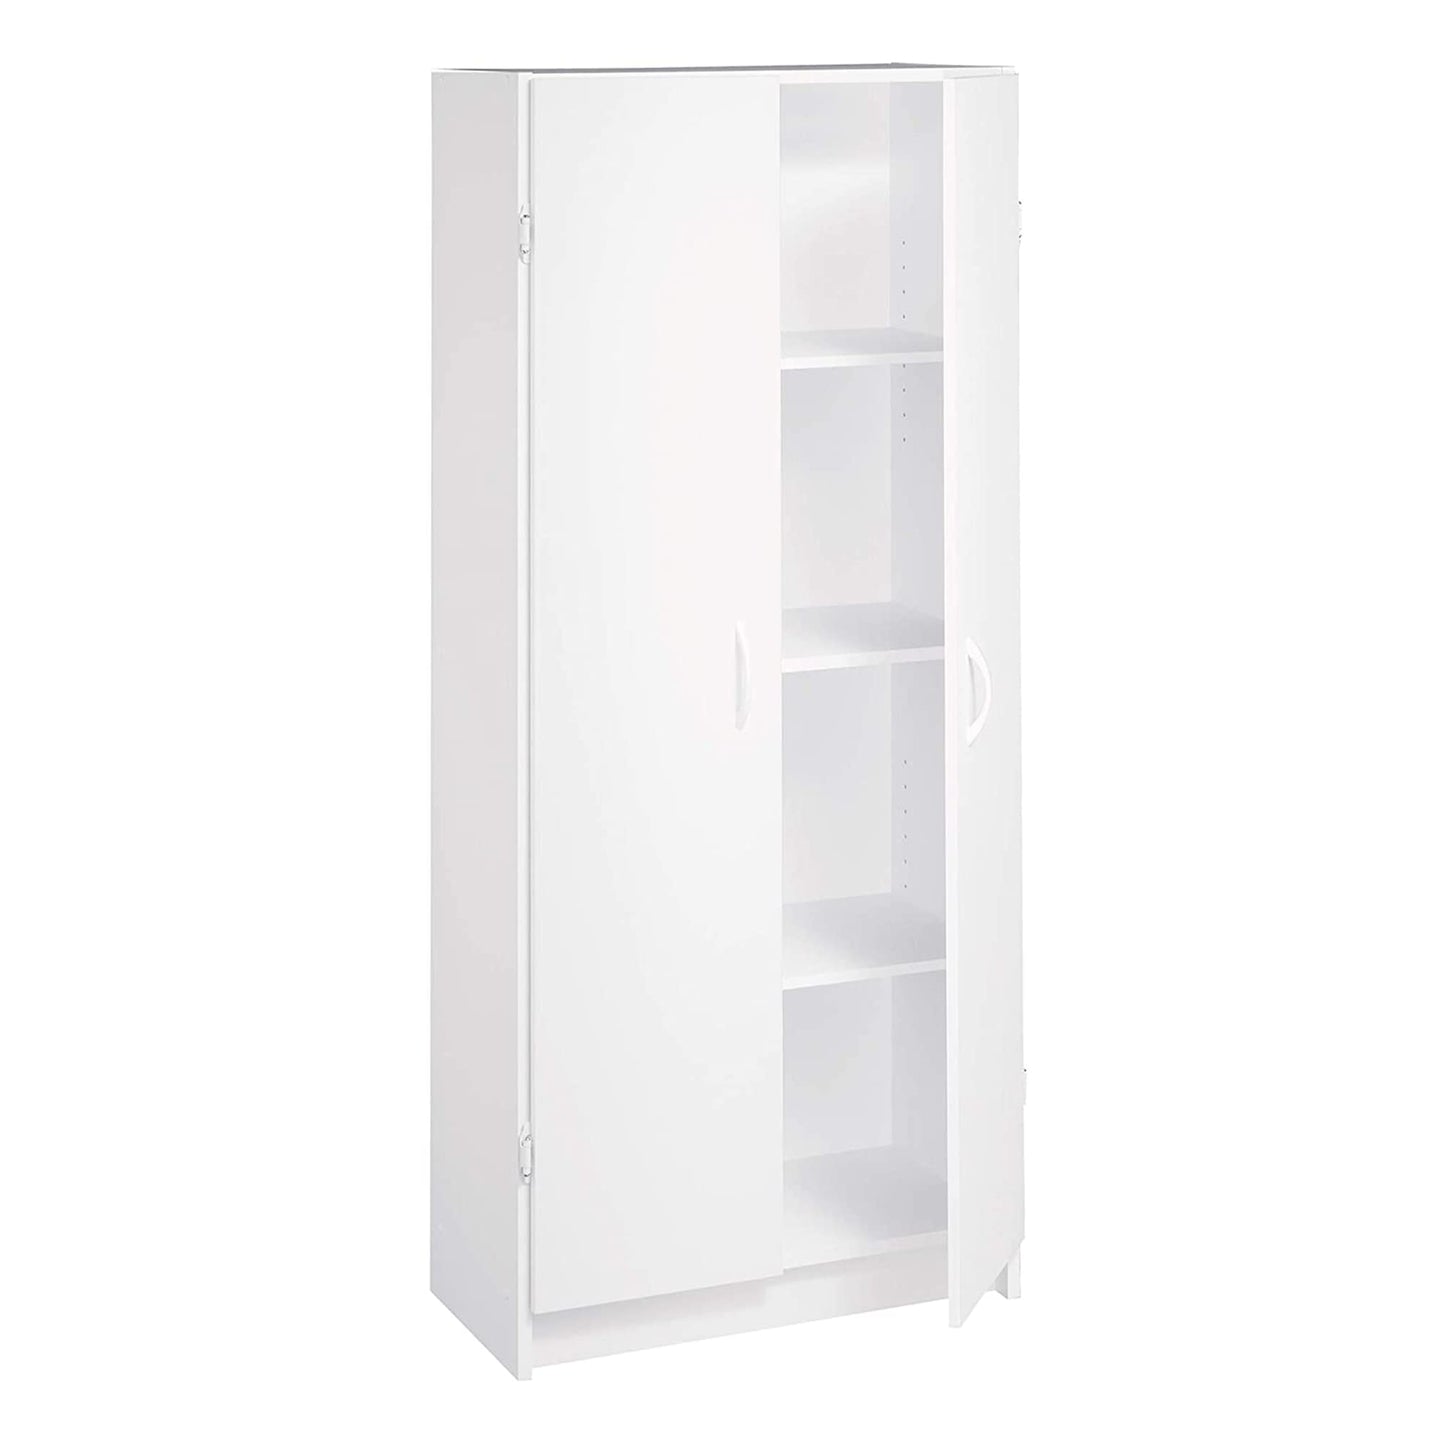 ClosetMaid Pantry Cabinet Cupboard with 2 Doors, Adjustable Shelves, Standing, Storage for Kitchen, Laundry or Utility Room, White